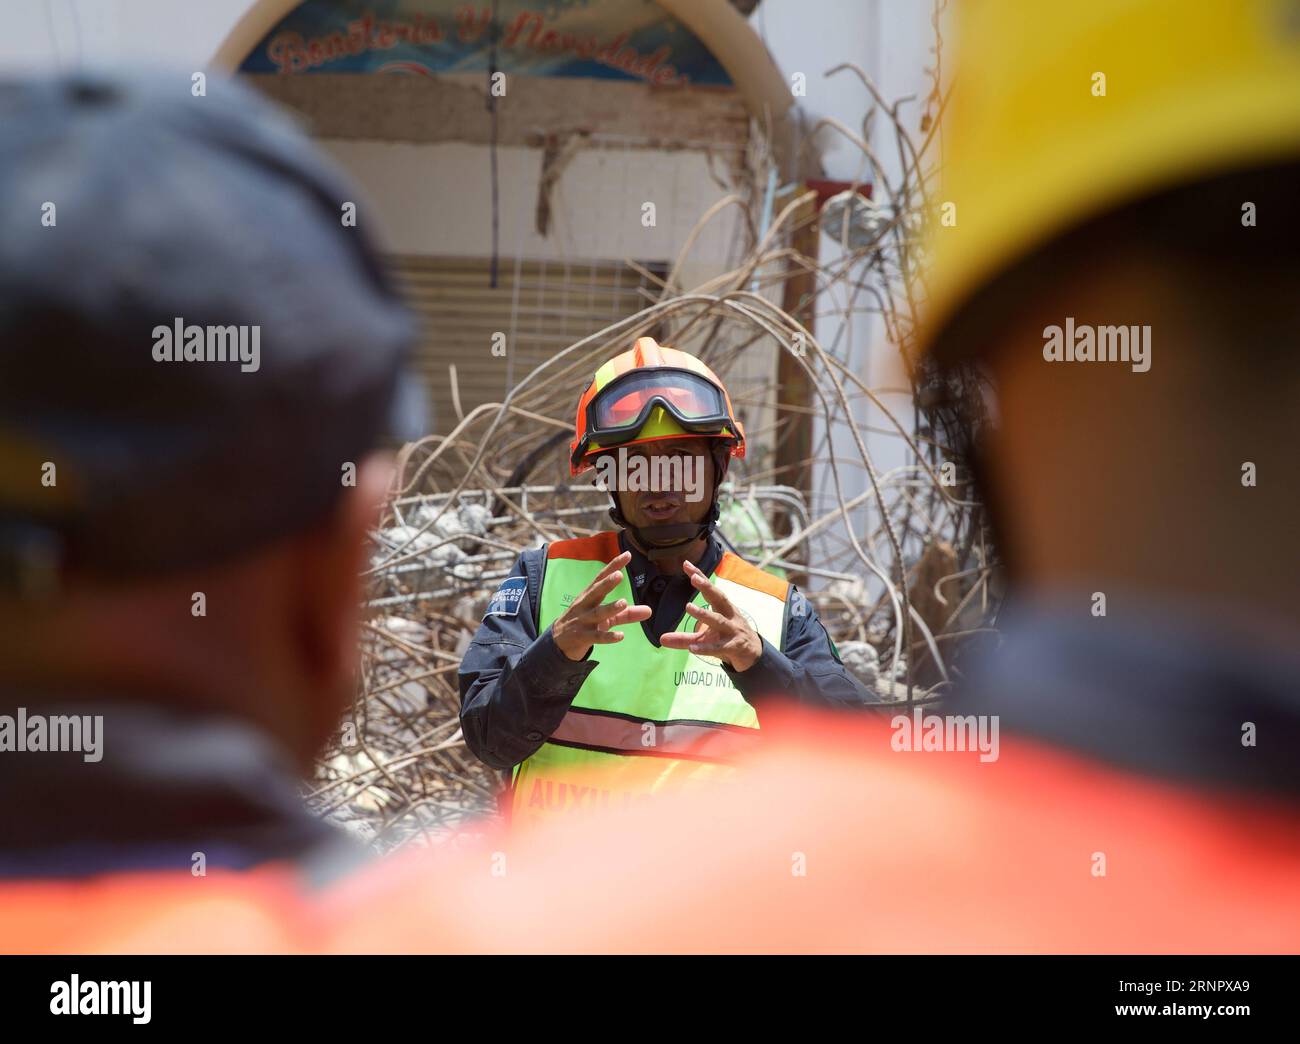 (170910) -- JUCHITAN (MEXICO), Sept. 10, 2017 -- Rescue workers wait to enter a searching zone after an earthquake hit in Juchitan, Oaxaca state, Mexico, Sept. 9, 2017. A powerful earthquake measuring 8.2 on the Richter scale struck off Mexico s southern coast late Thursday night, killing 90 people. ) MEXICO-OAXACA-JUCHITAN-EARTHQUAKE DanxHang PUBLICATIONxNOTxINxCHN Stock Photo